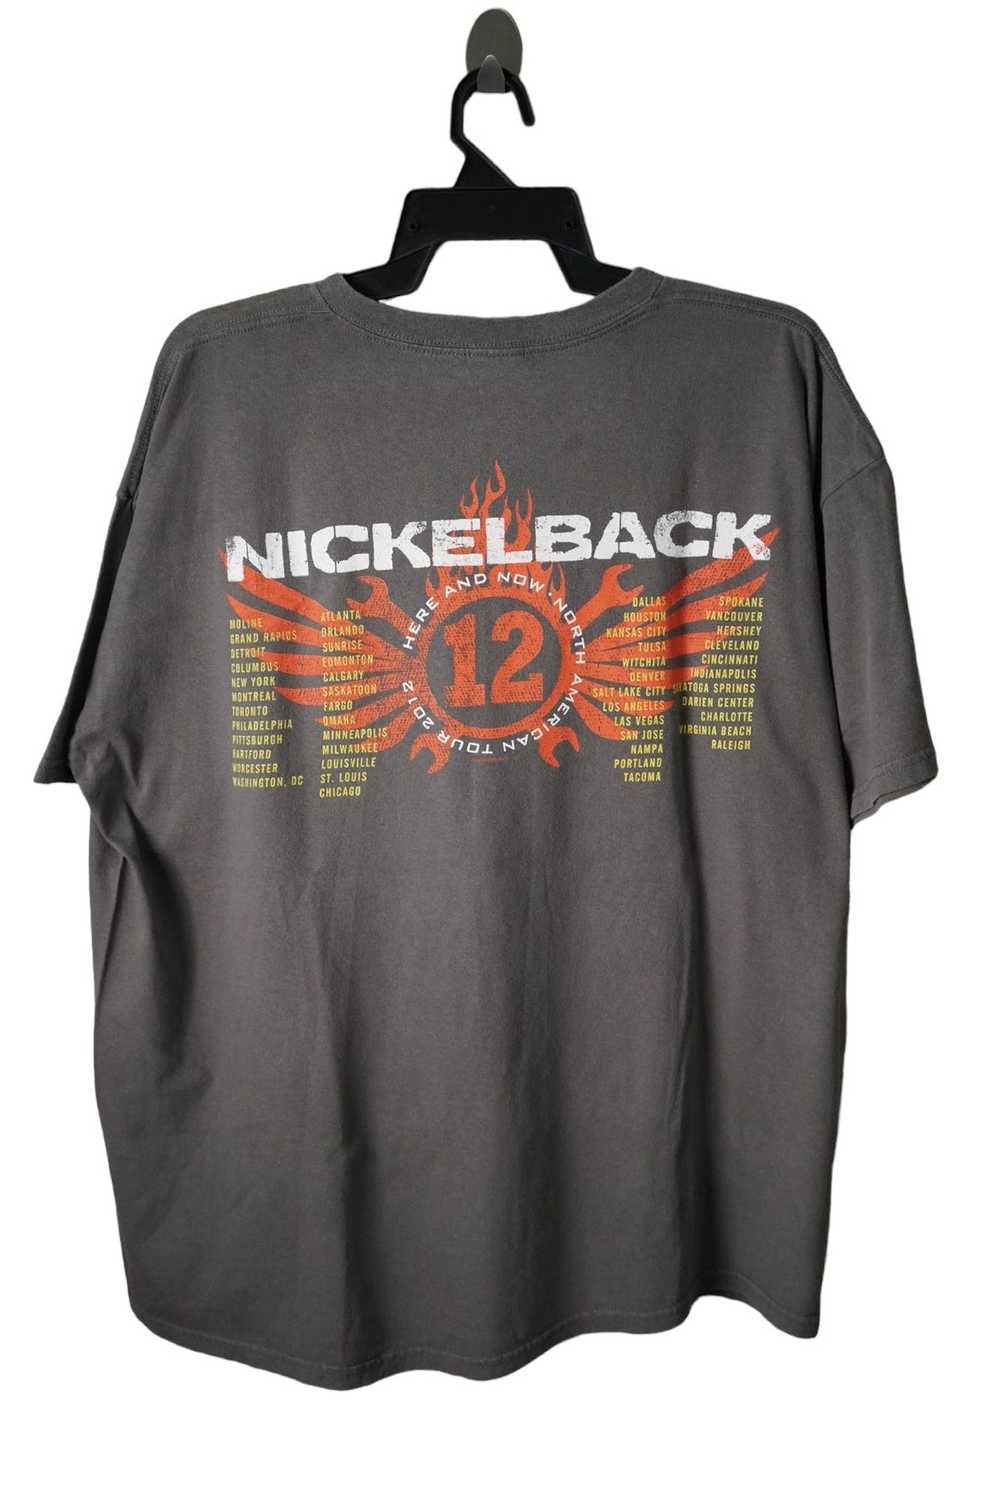 Band Tees × Tour Tee Nickelback Here and Now Nort… - image 4